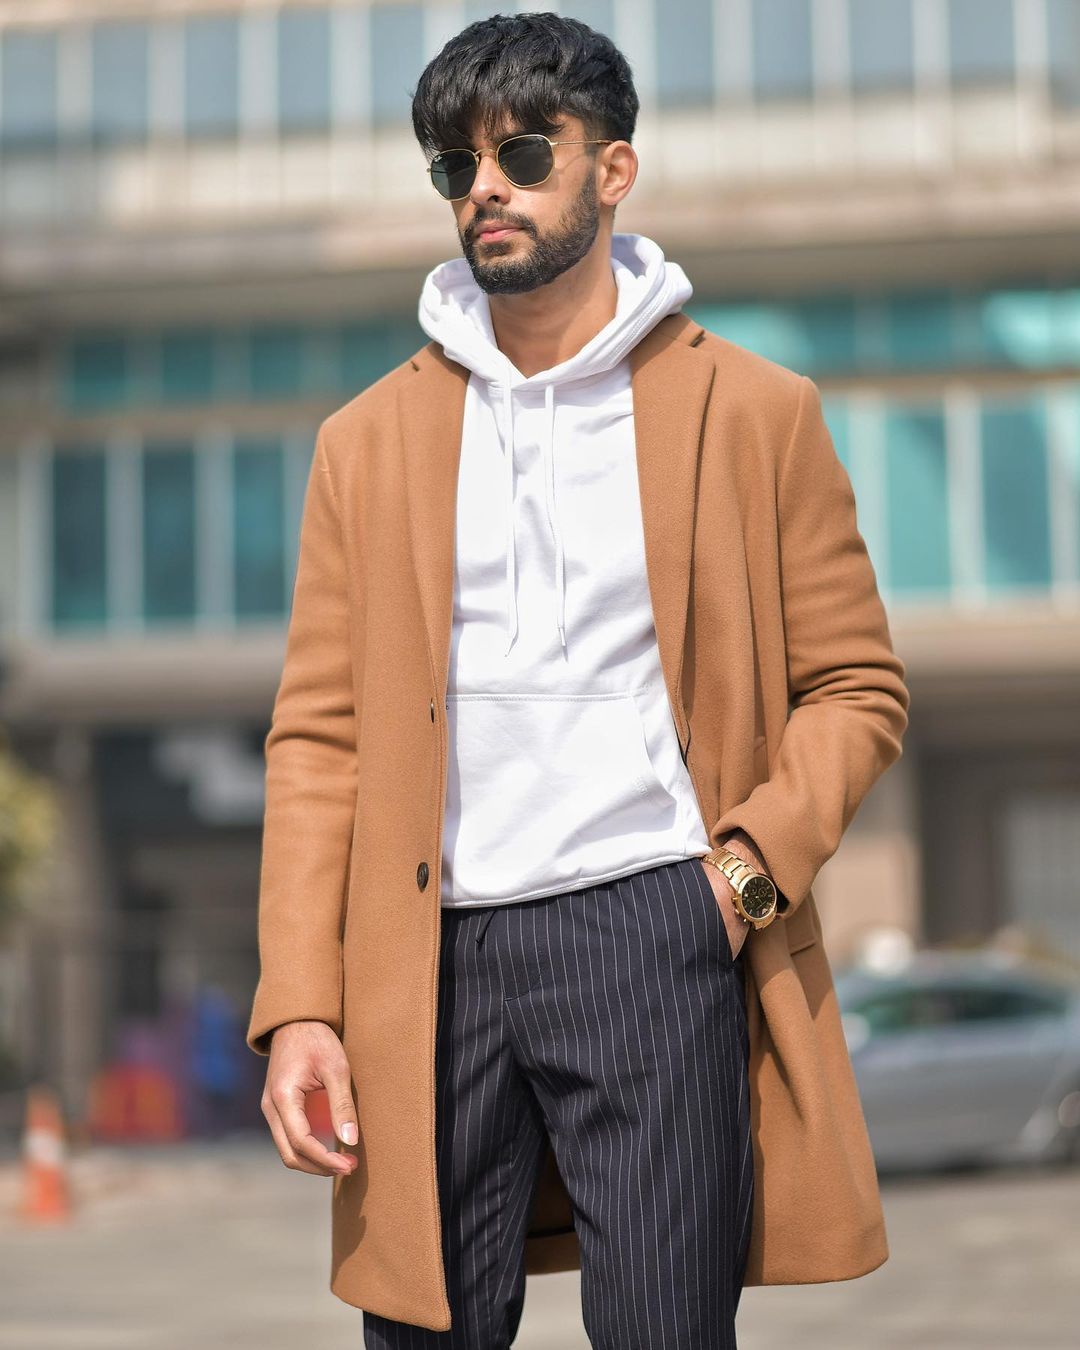 Premium Photo | Portrait of pensive indian man with curly hair wearing  stylish jacket looking away on the street